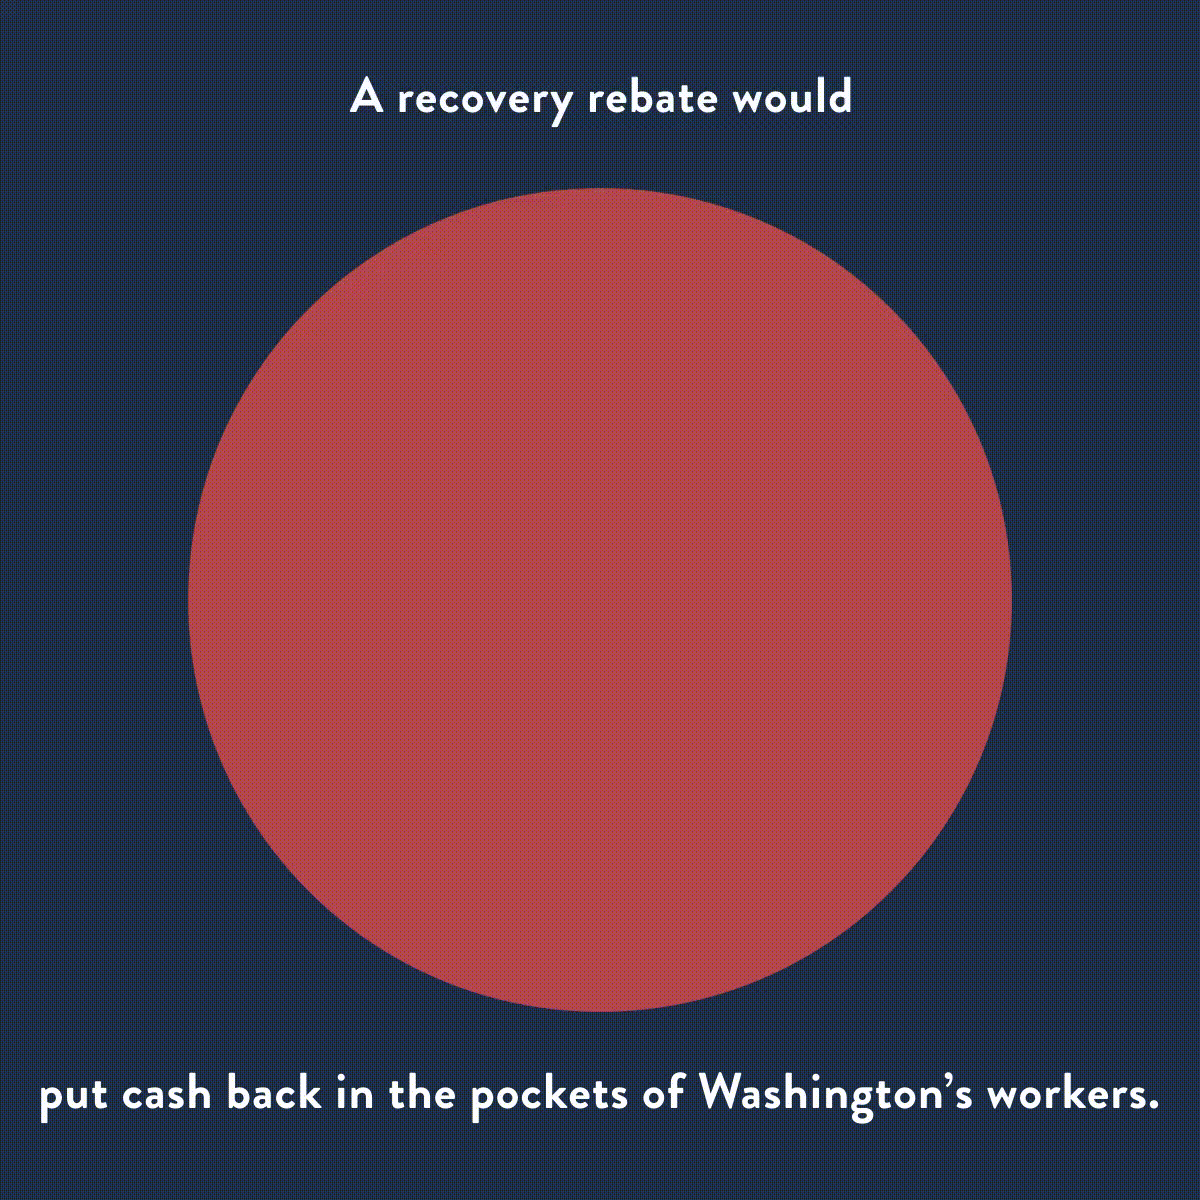 Gif of family in circle with arrow rotating around edge. Dollar appears in child's hand and they pay for groceries at a checkout counter. Text says "A recovery rebate would put cash back in the pockets of Washington's workers so families can spend and keep money flowing through our communities."